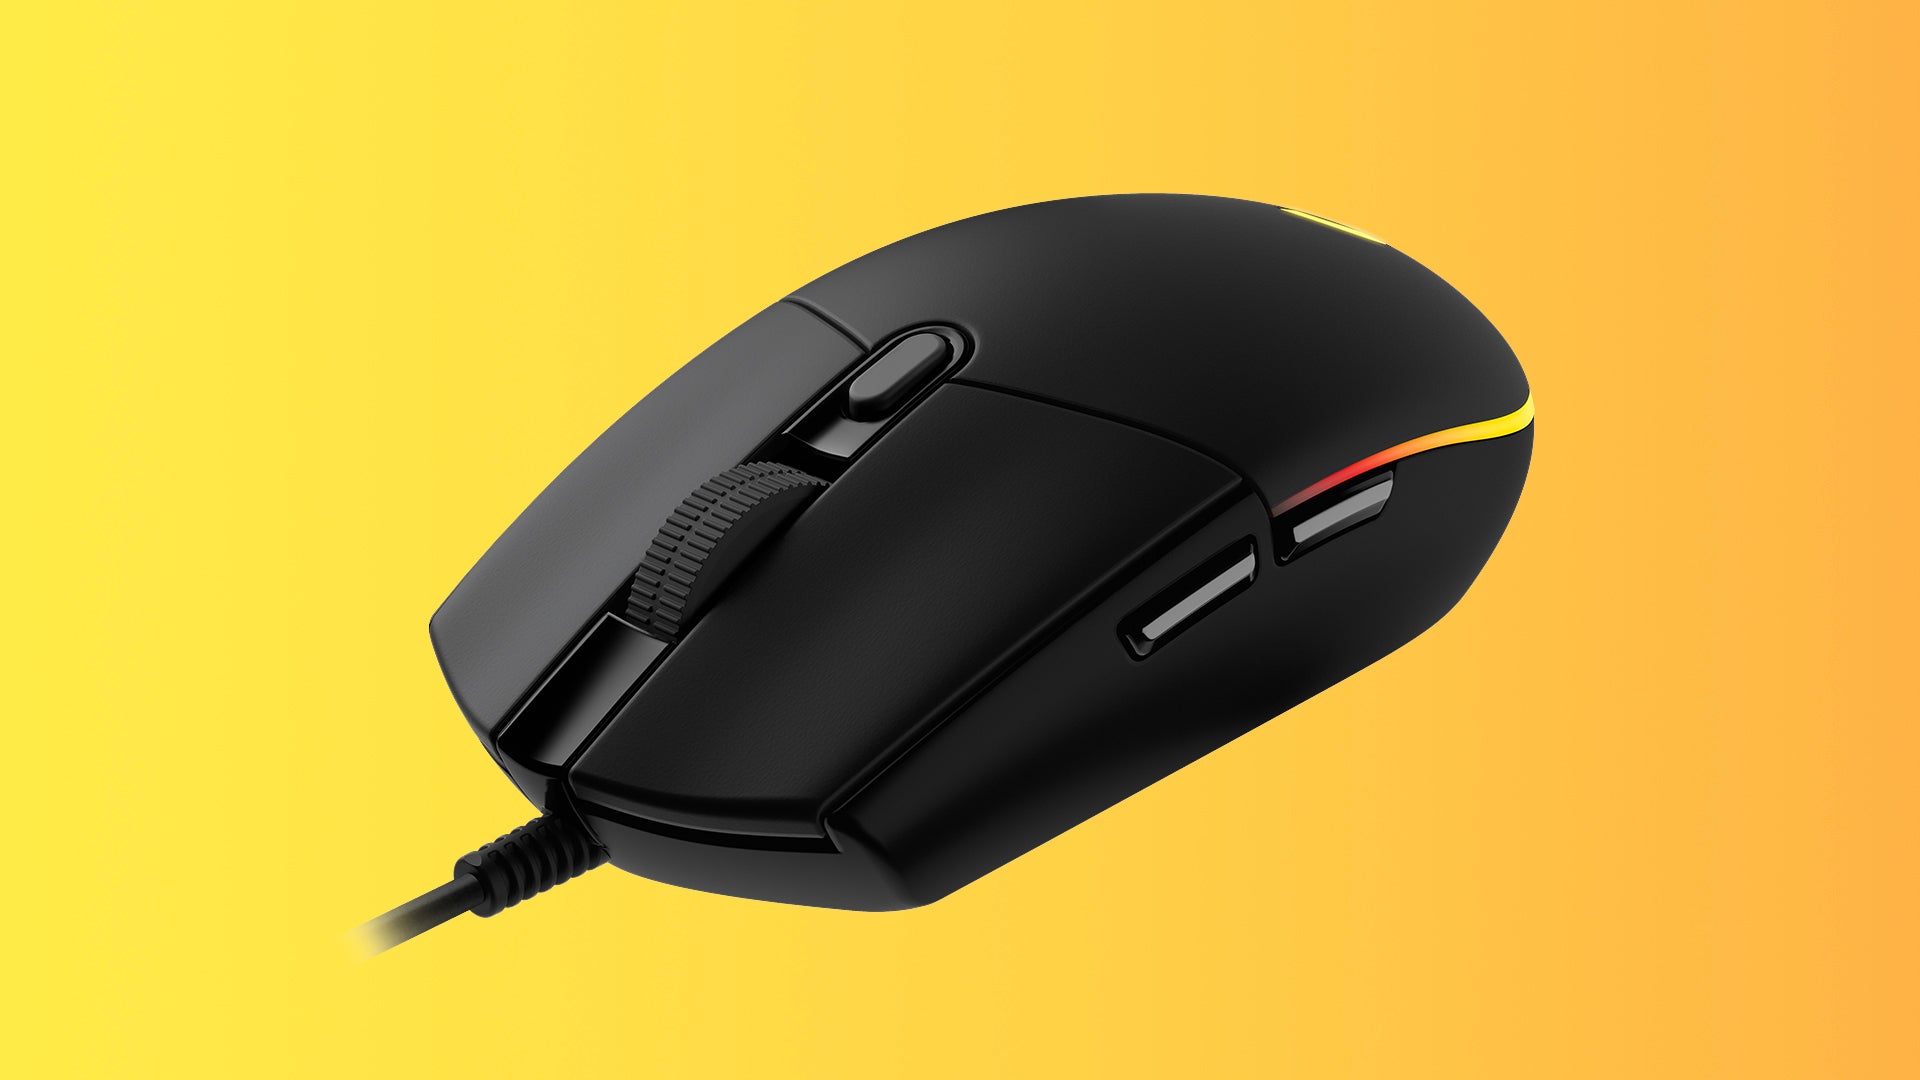 Grab Logitech's G203 Lightsync gaming mouse for just £14 in the Prime Early Access sale